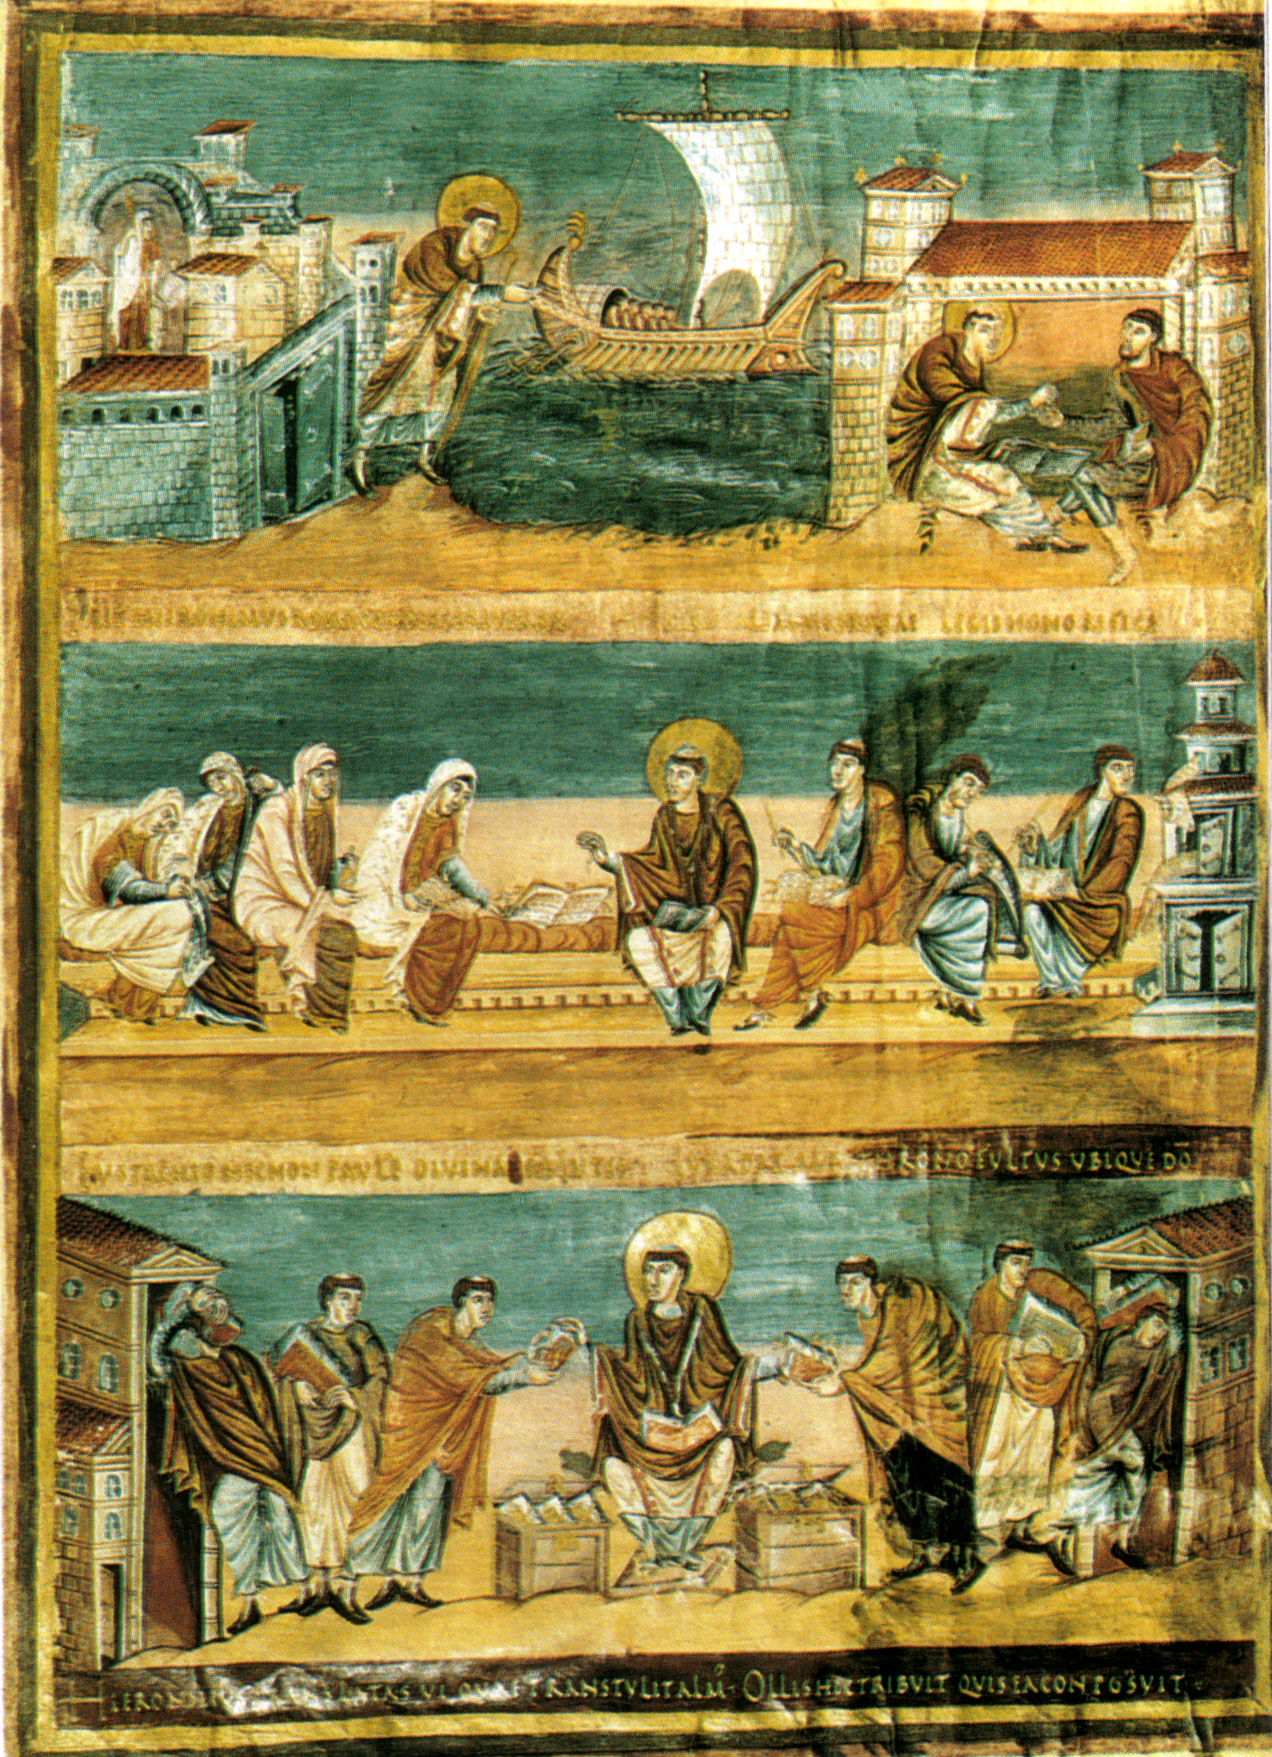 Scenes from St. Jerome's Life, Bible of Charles the Bald